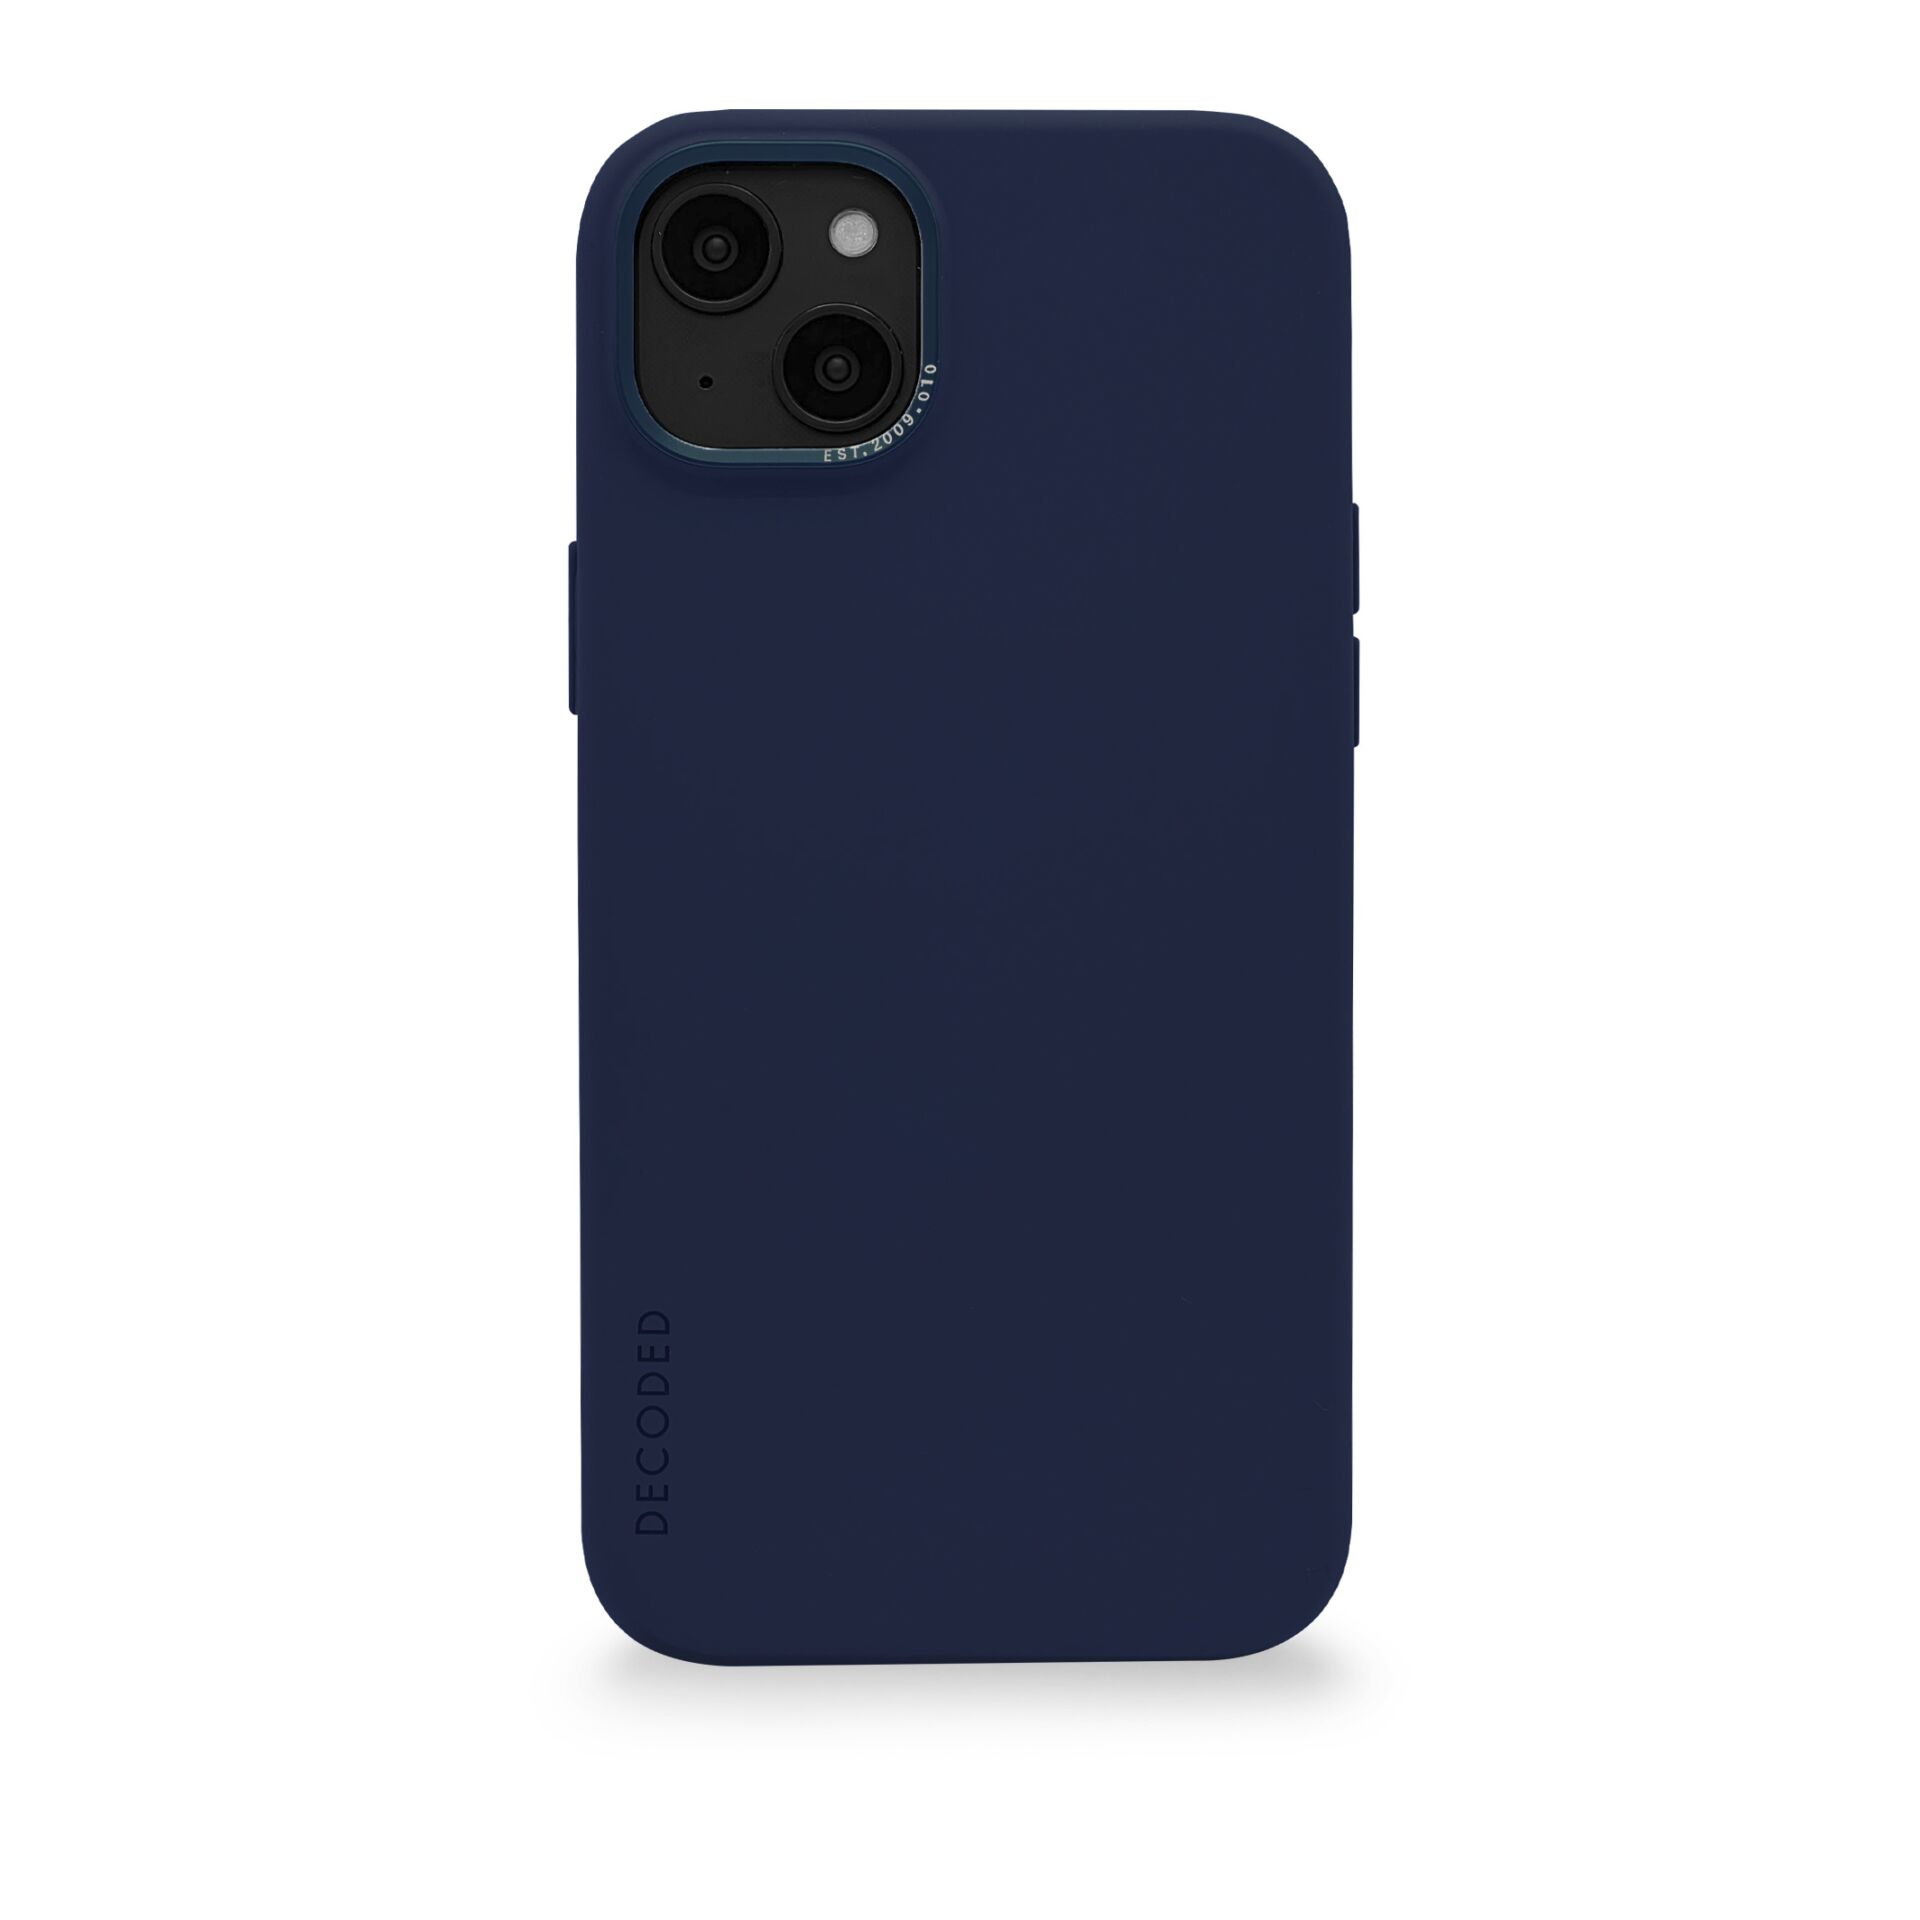 DECODED AntiMicrobial Silicone Backcover 14 Navy Plus, Backcover, iPhone Navy Apple, Peony, Peony